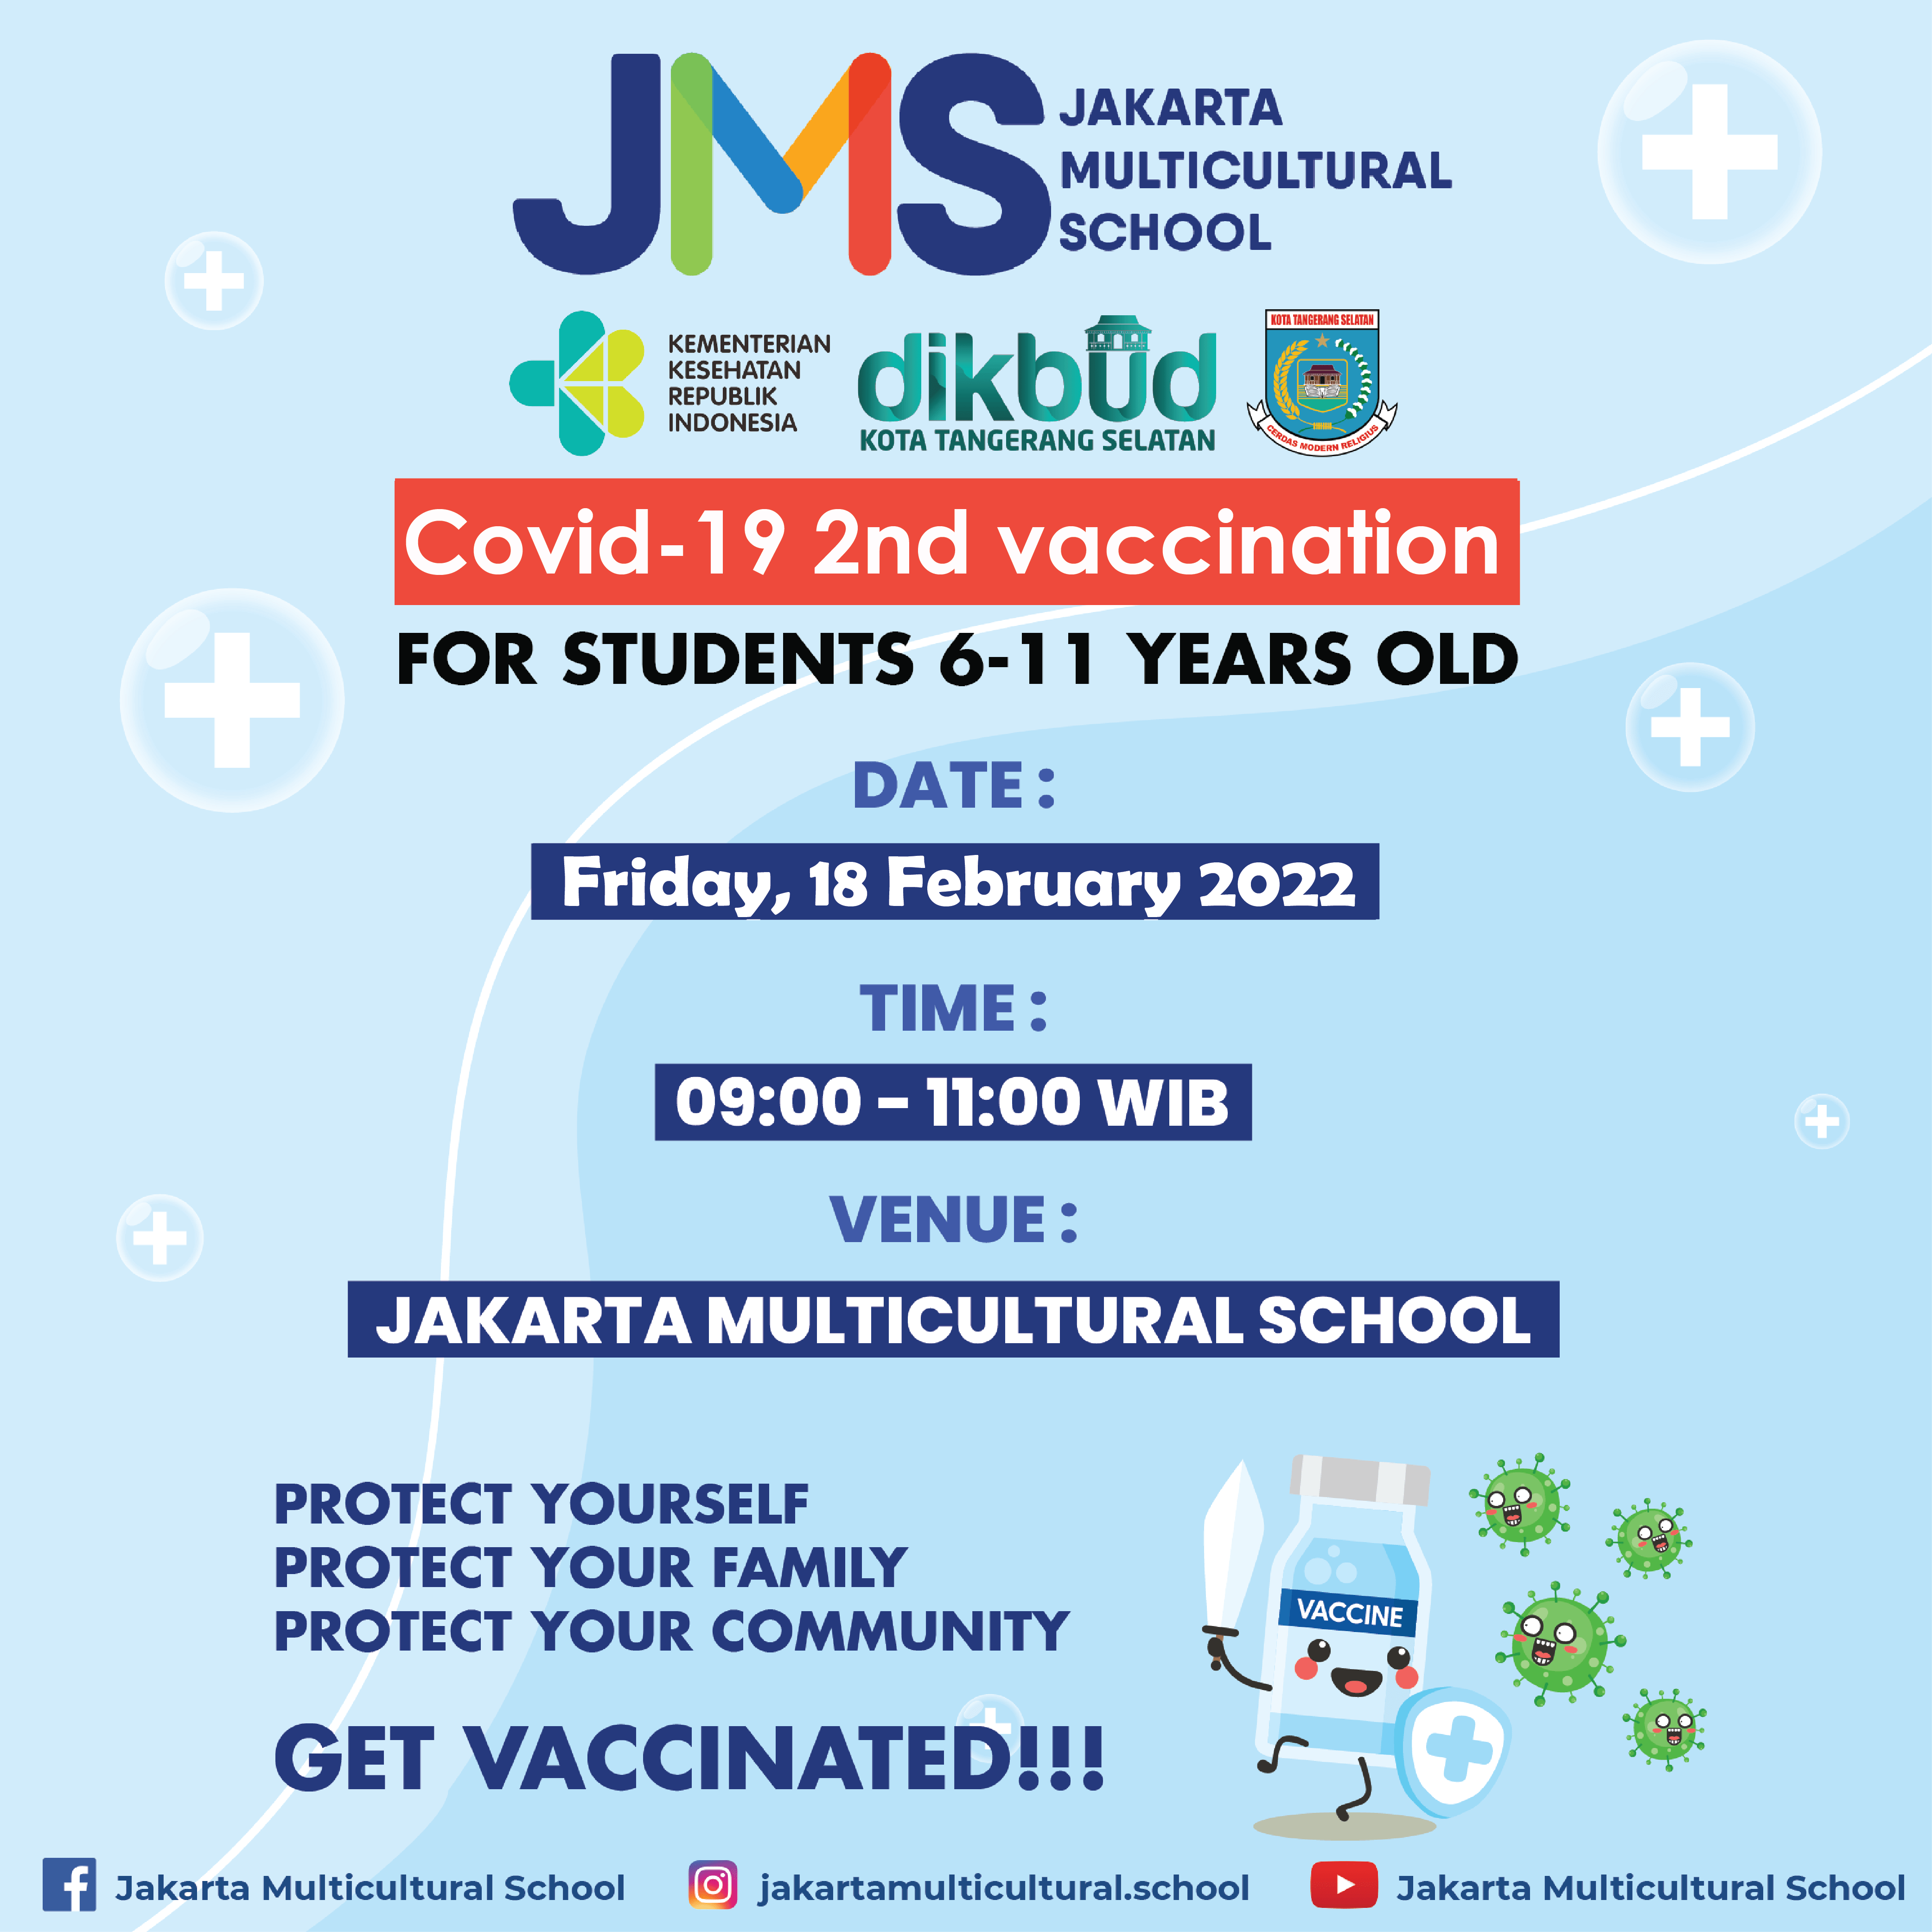 The Covid-19 Vaccine Program for Students 6-11 Years Old at JMS!